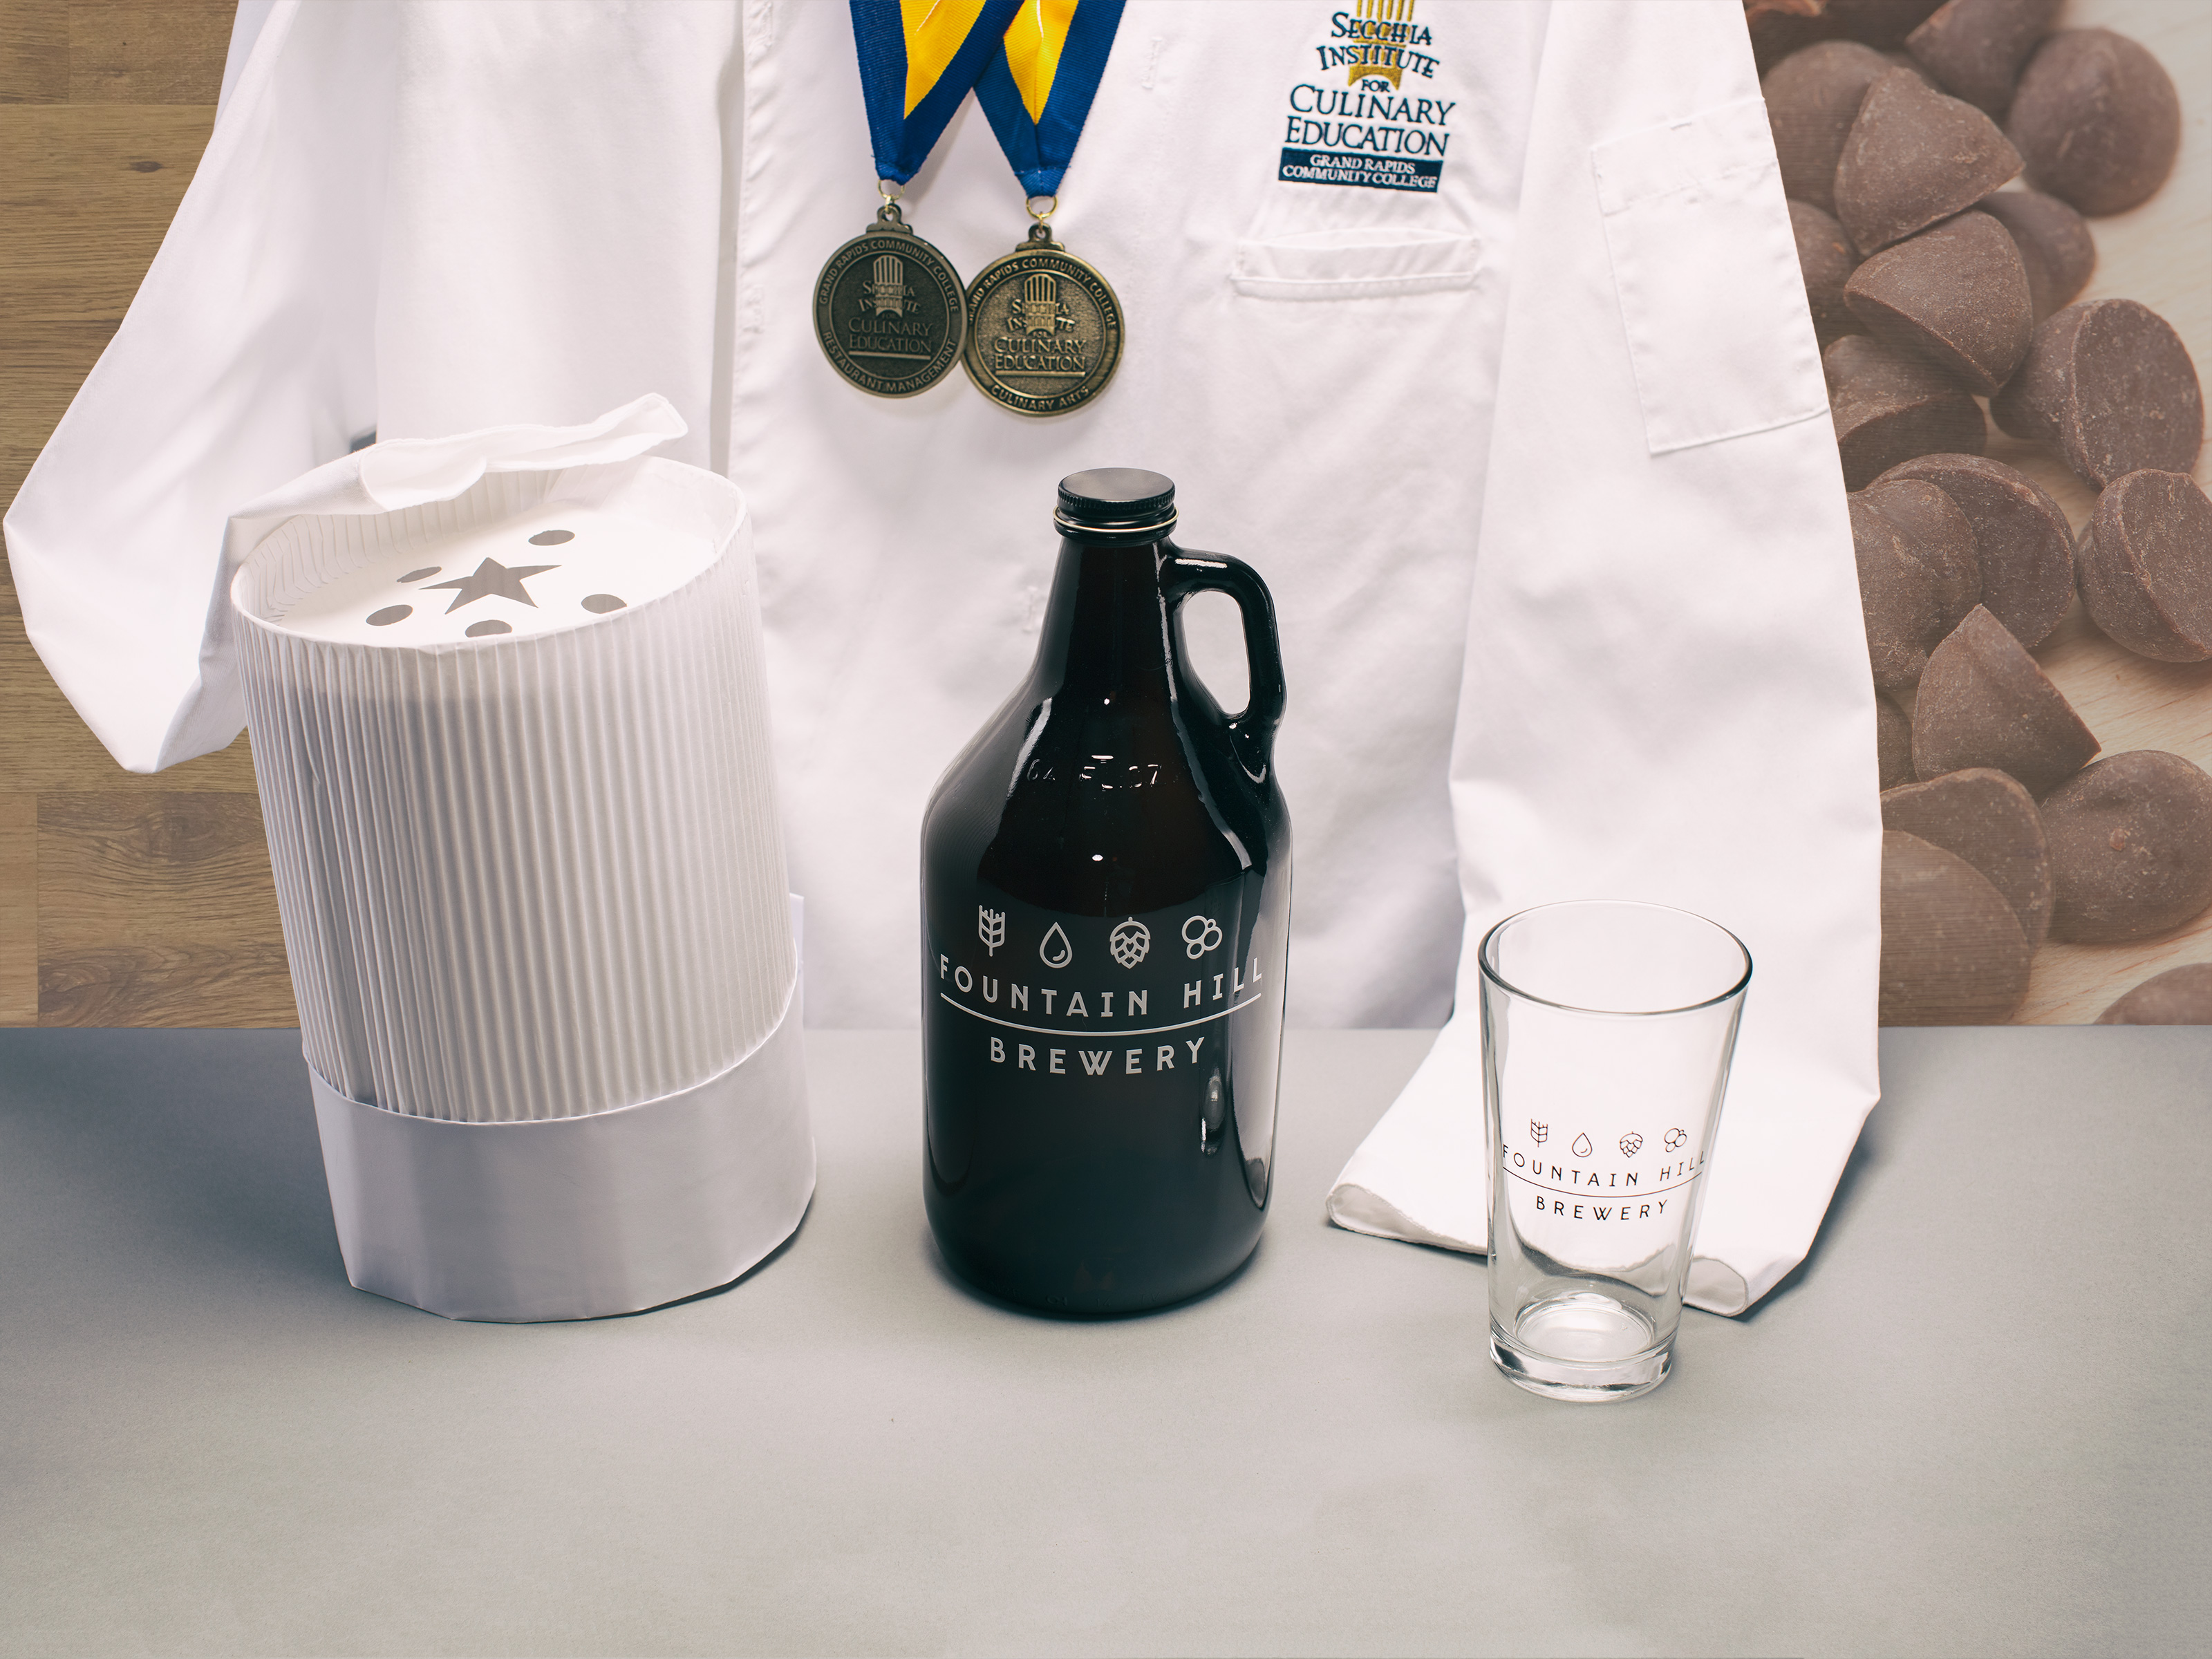 Culinary Arts, Hospitality, and Brewing Pathway